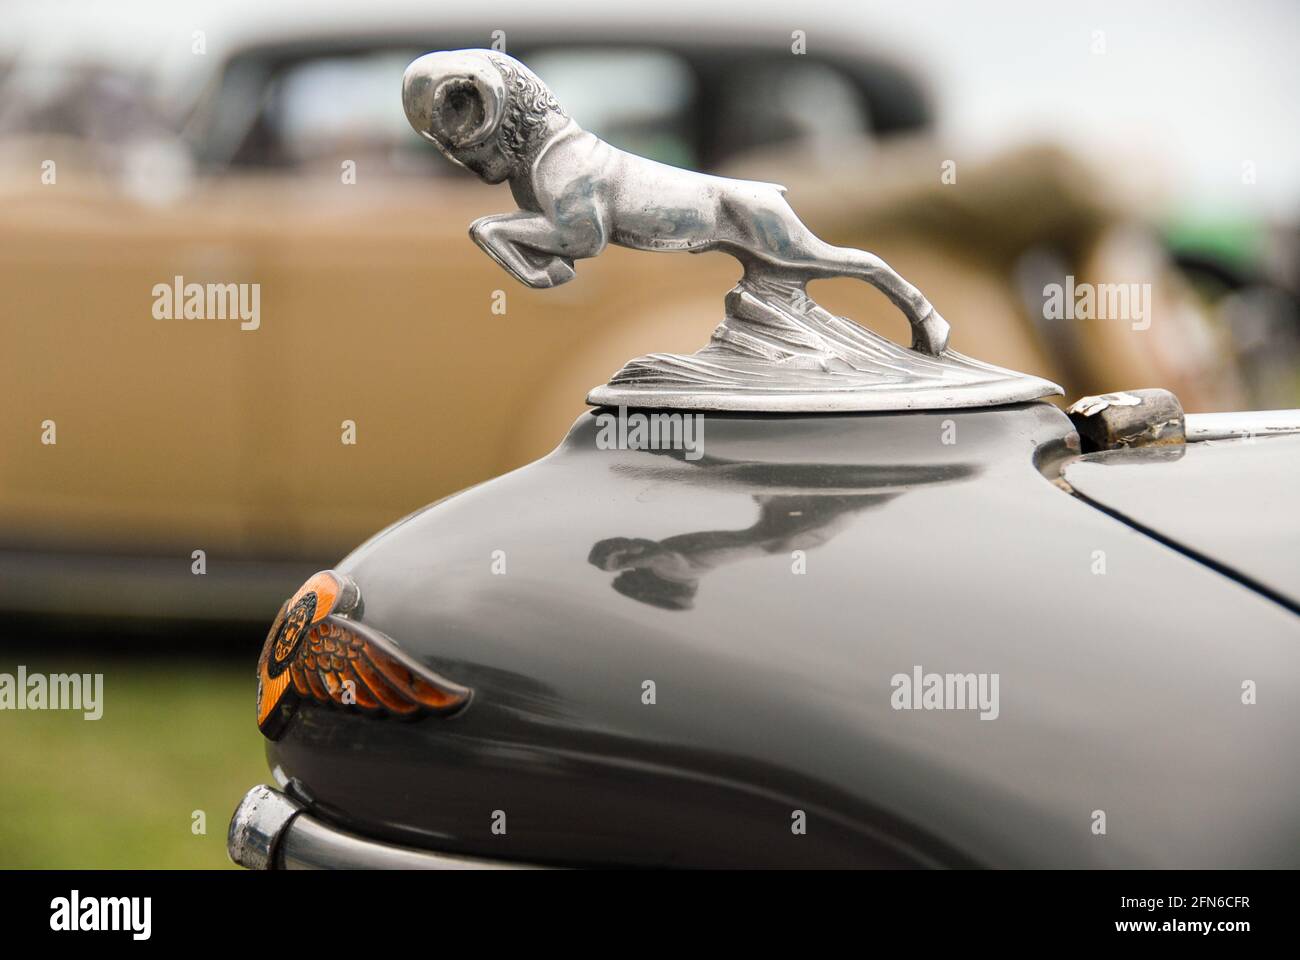 Chrome and polish: Hood Ornament of a Dodge classic car at Art Deco Weekend in Napier. Stock Photo